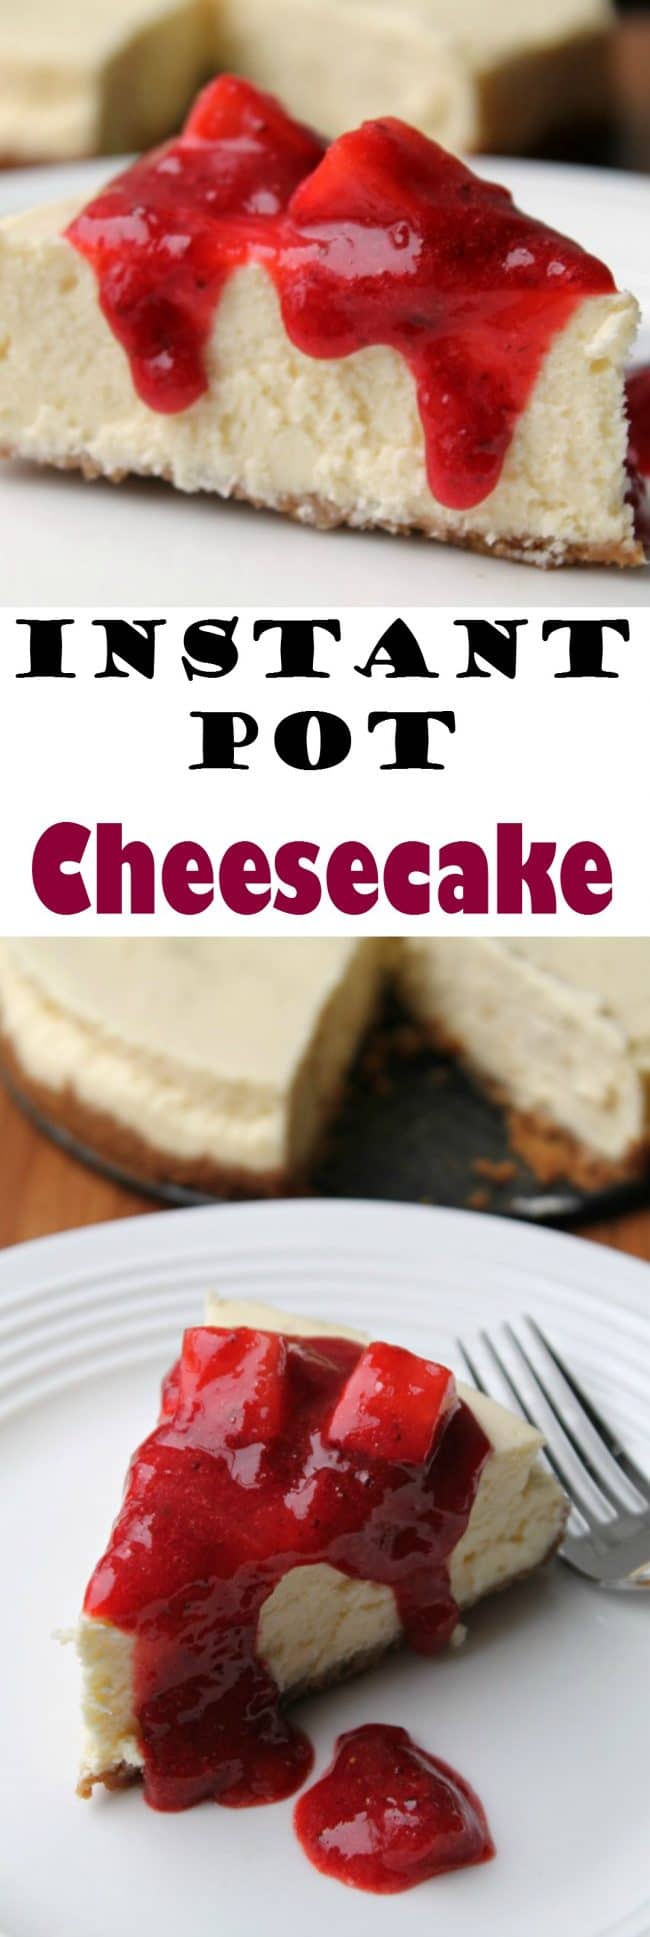 Instant Pot Cheesecake pin